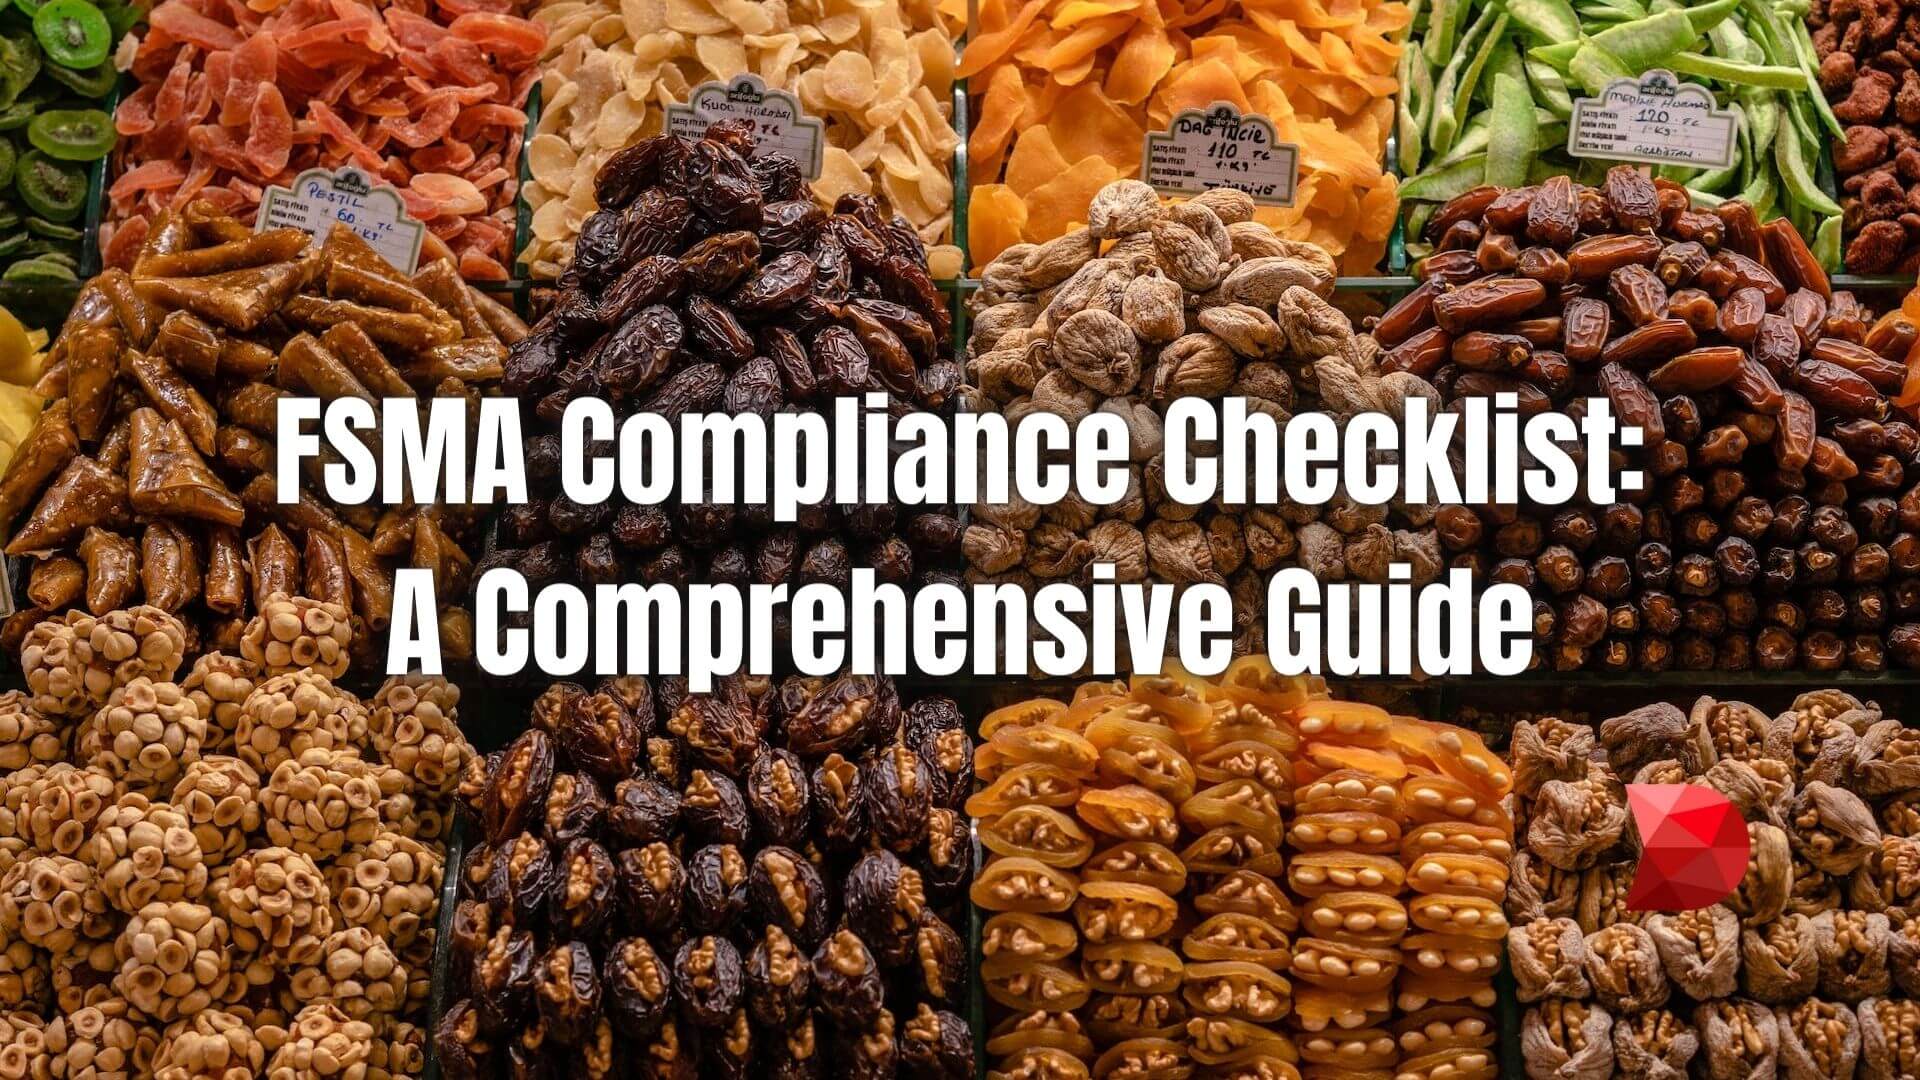 This article will talk about what FSMA is and how to create an FSMA compliance checklist for your business. Read here to learn more!